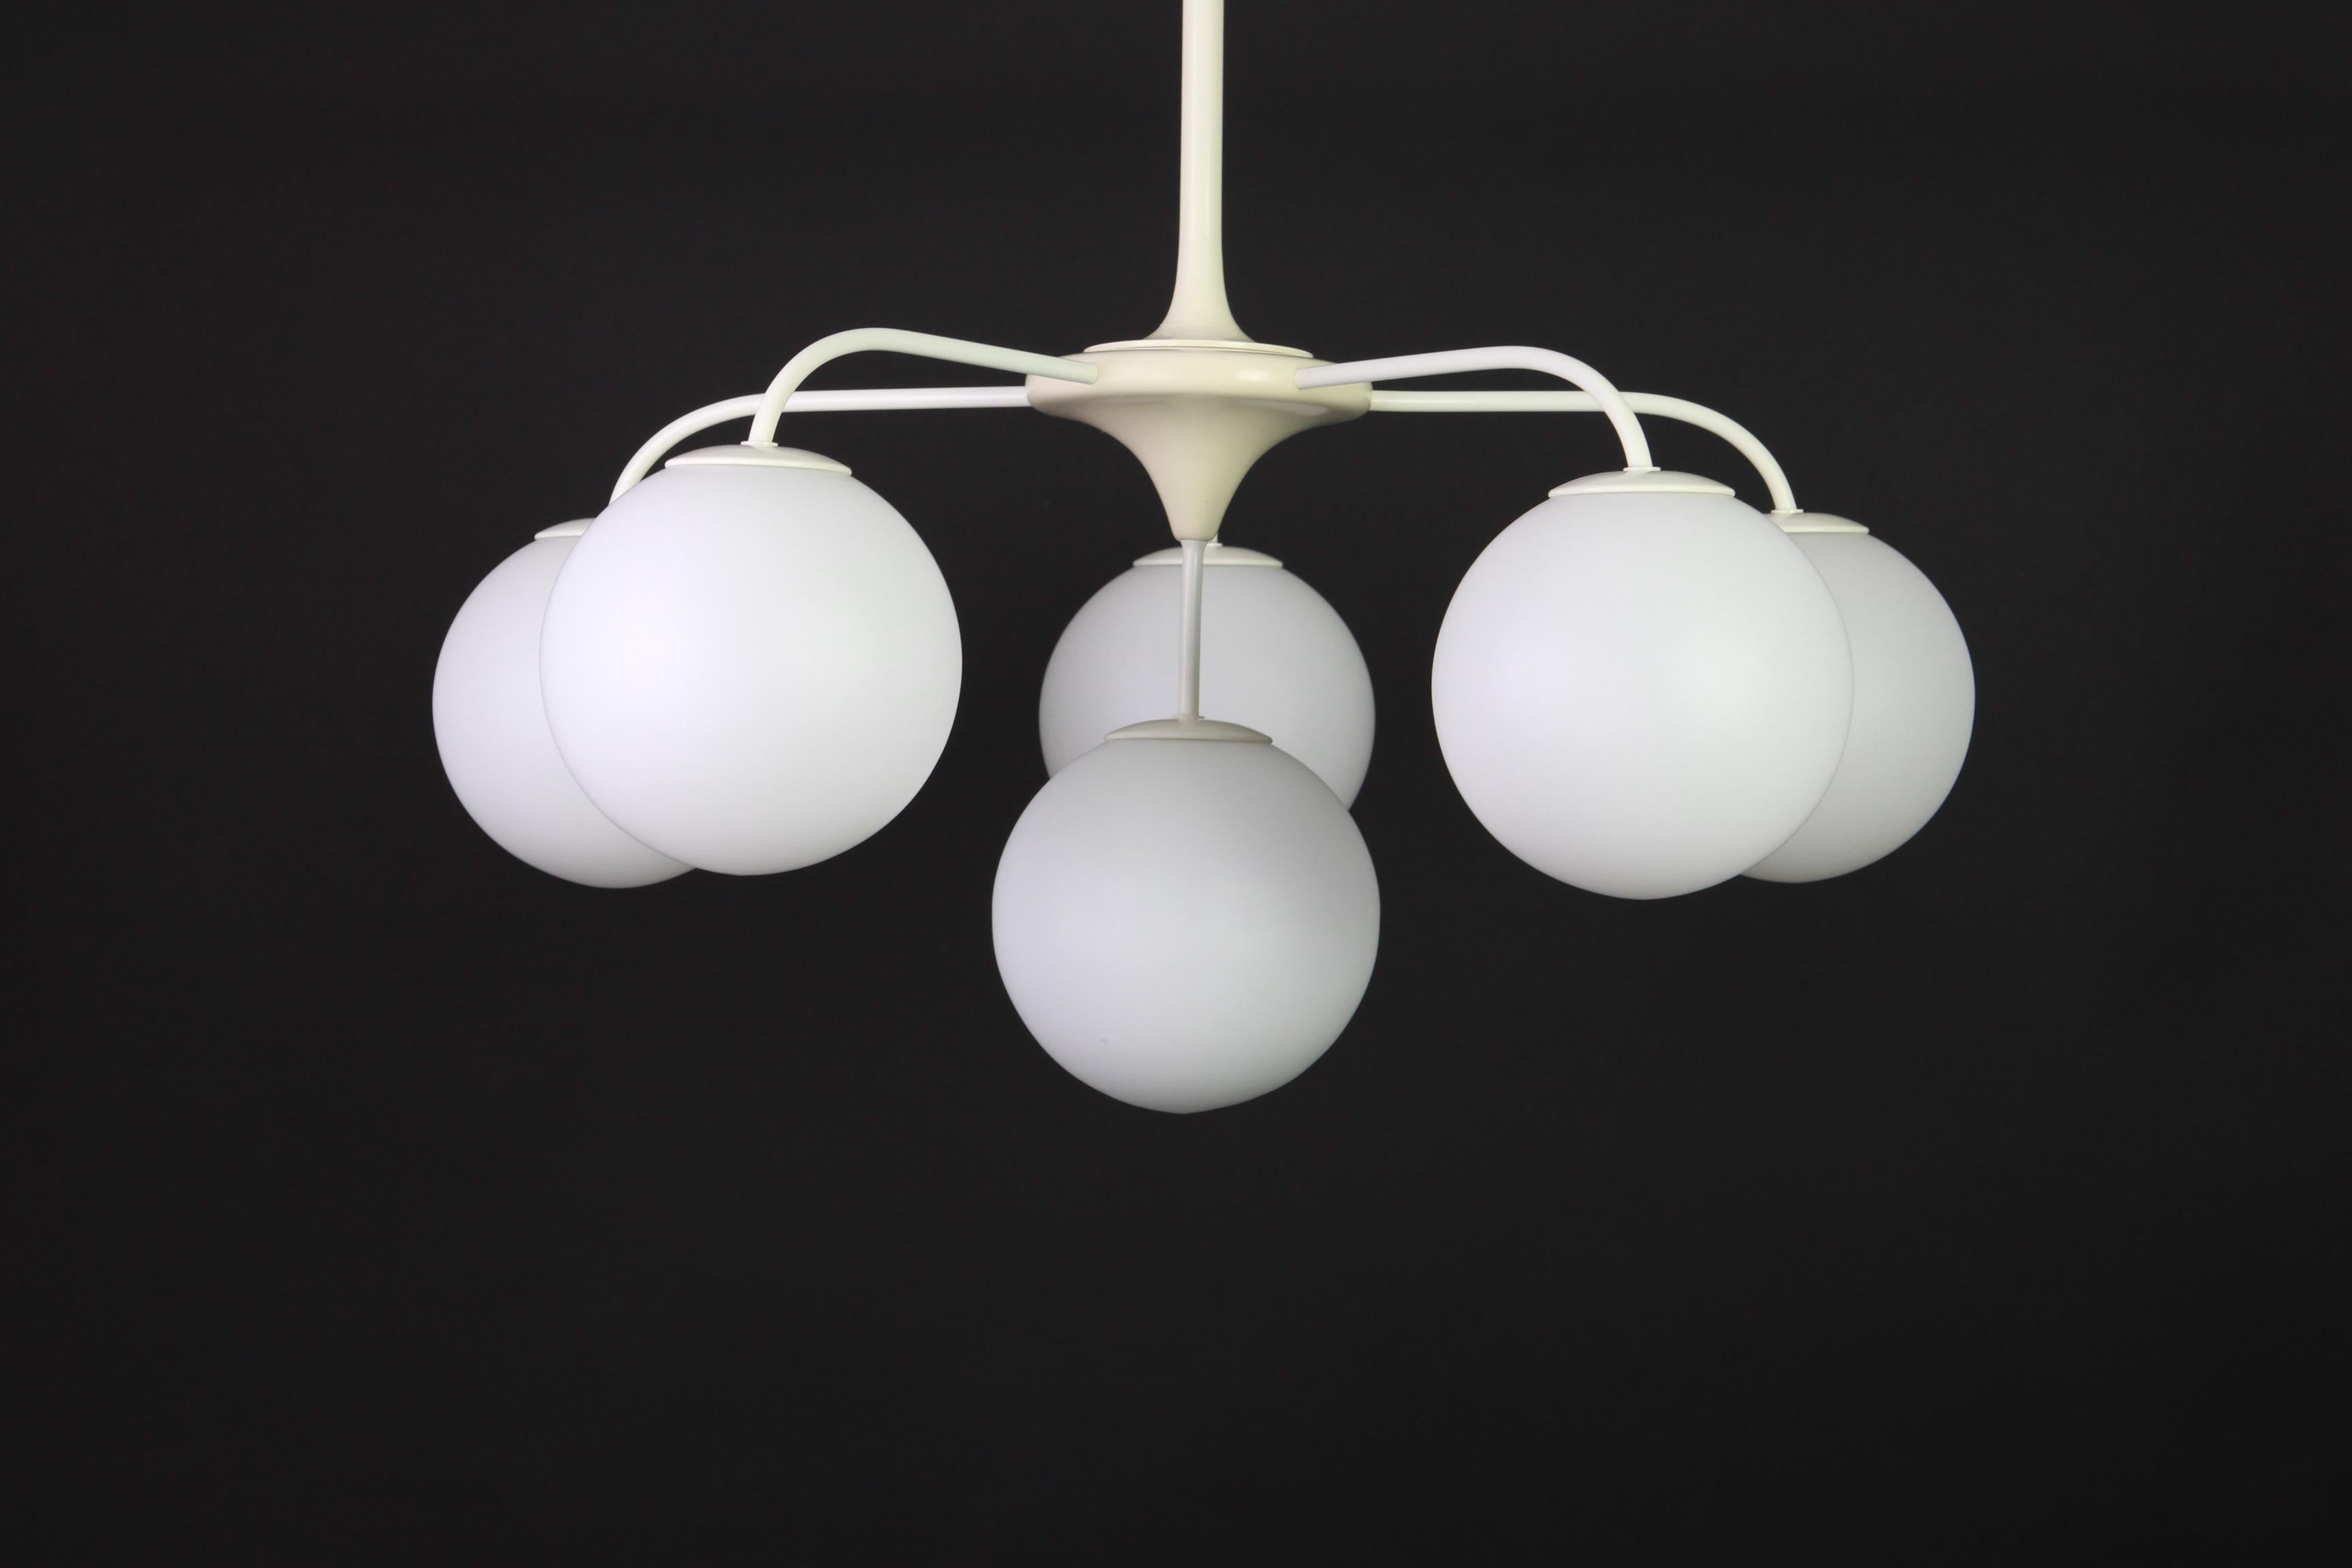 Atomic chandelier with six-glass globes was designed by the Swiss artist and designer Max Bill for Temde Leuchten. The globes are hand blown and fitted with a screwing device.

High quality and in very good condition. Cleaned, well-wired and ready